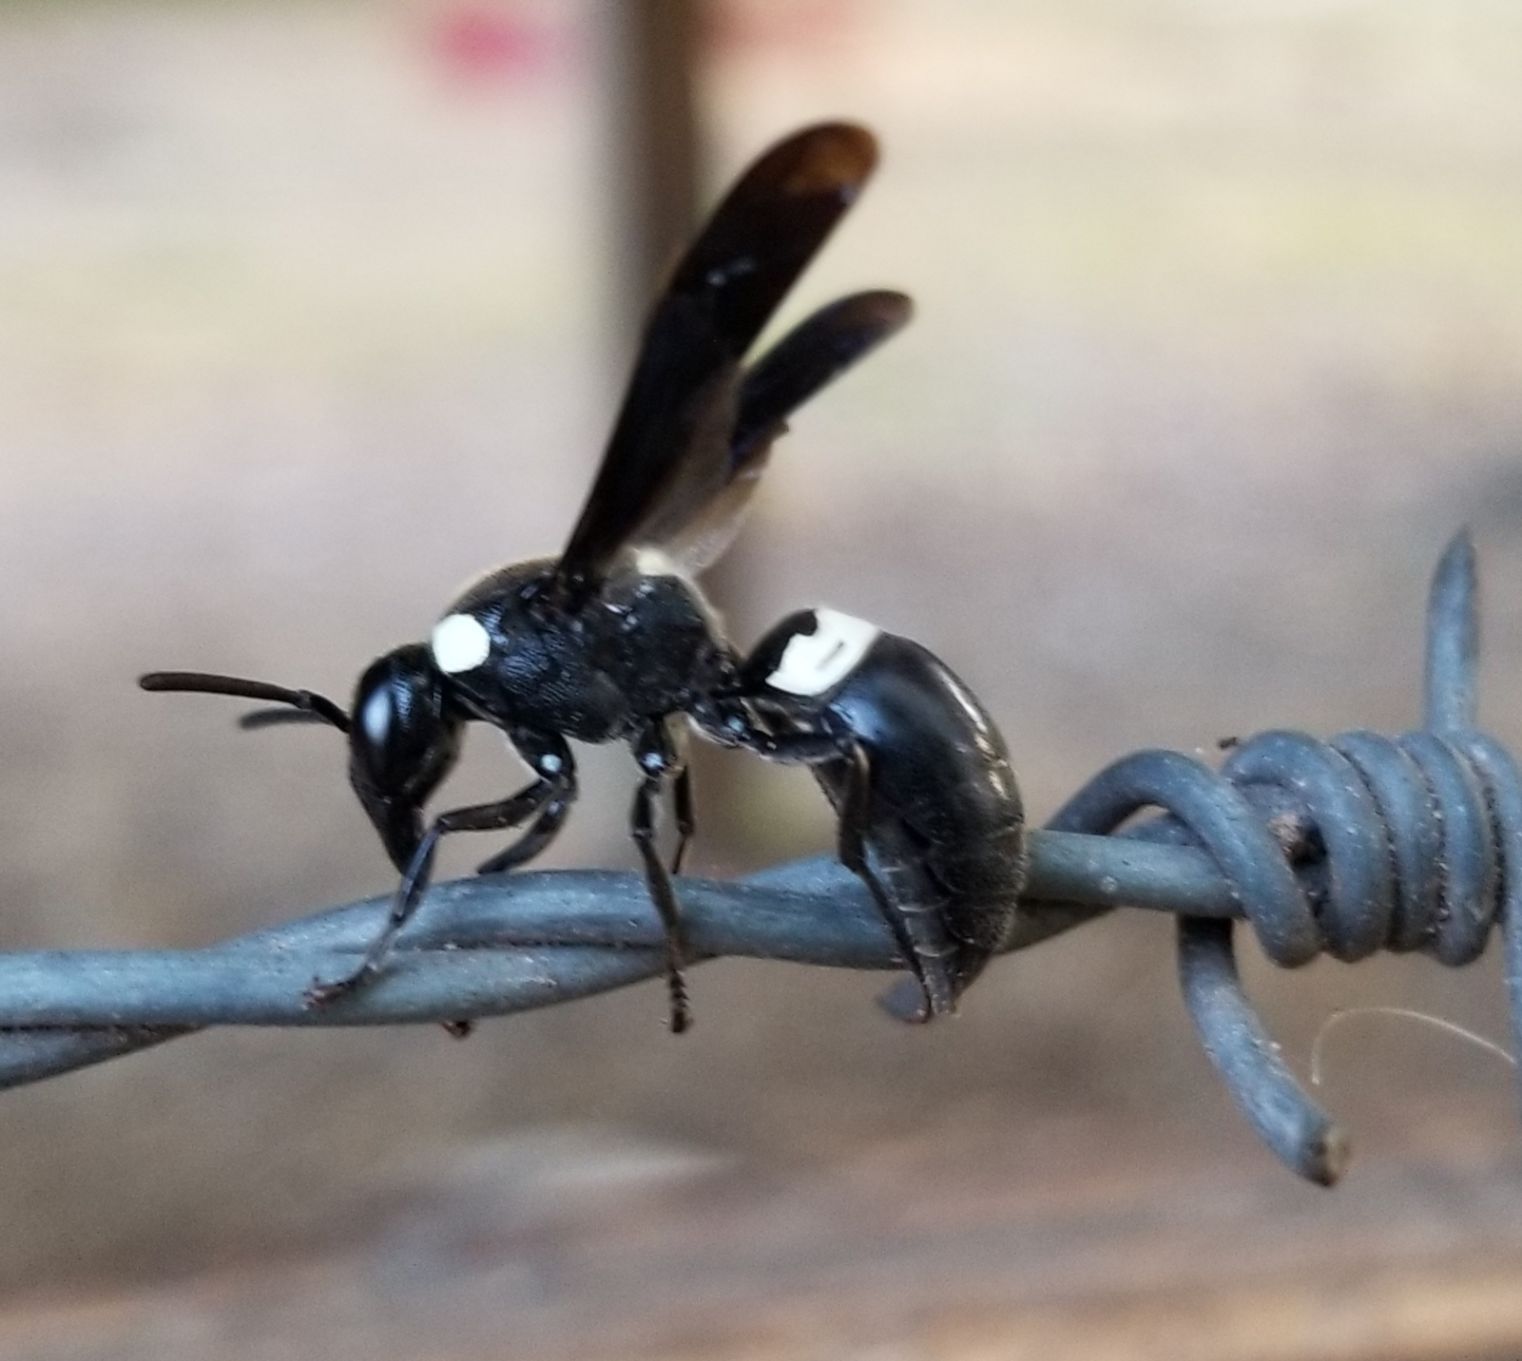 black wasp with white stripes on antenna